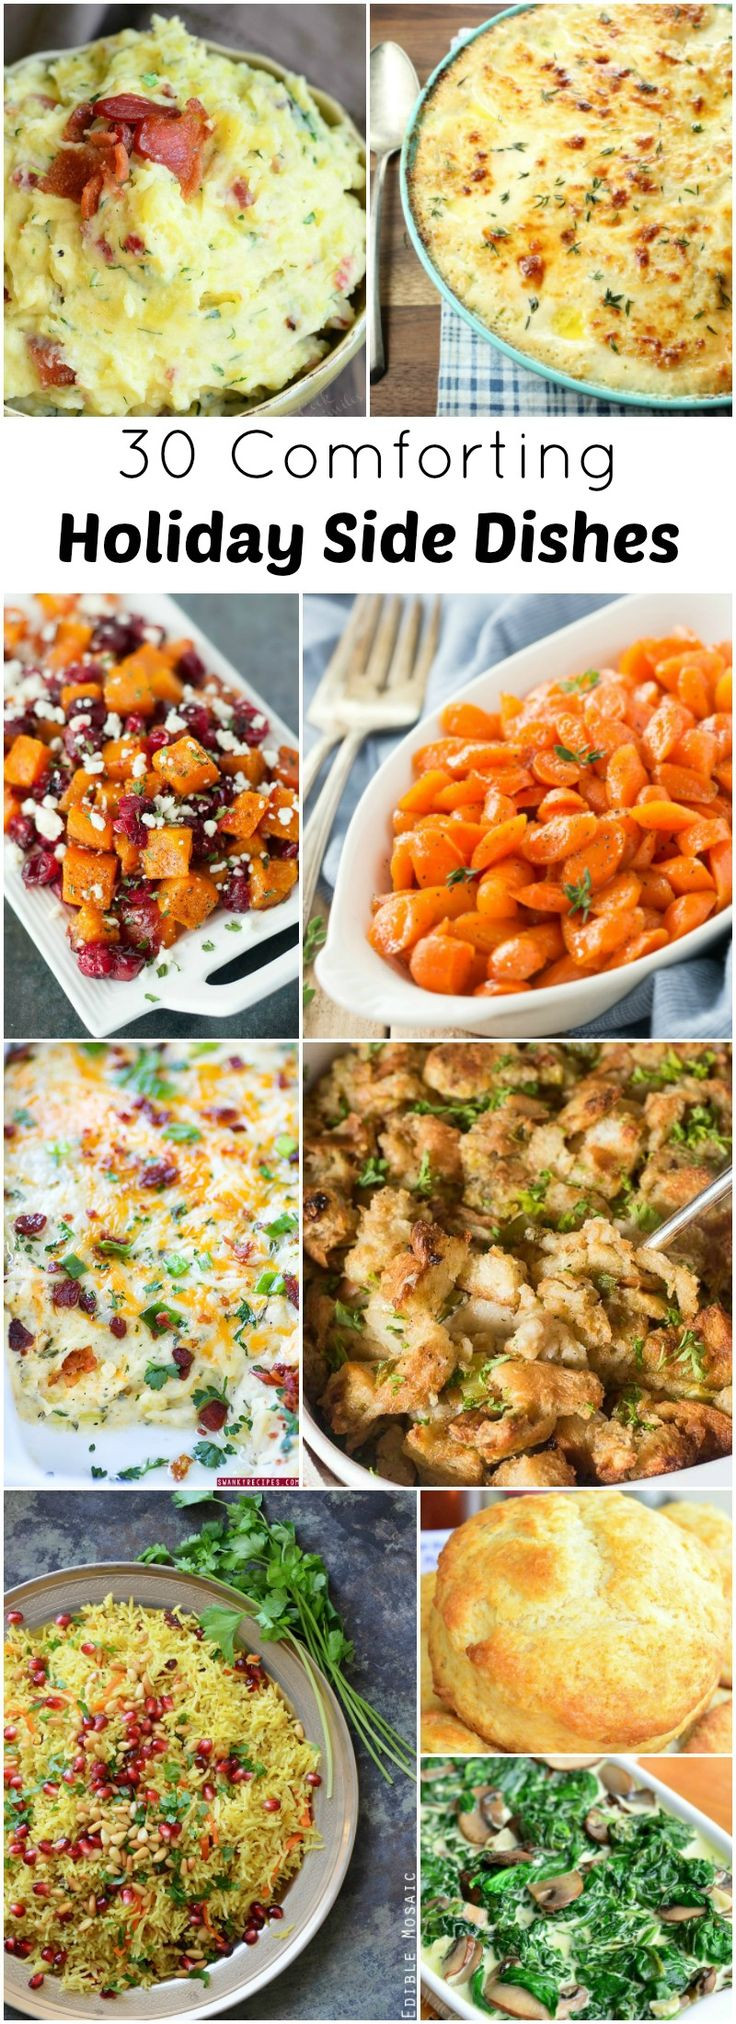 Best Side Dishes For Christmas Dinner
 17 Best ideas about Holiday Side Dishes on Pinterest